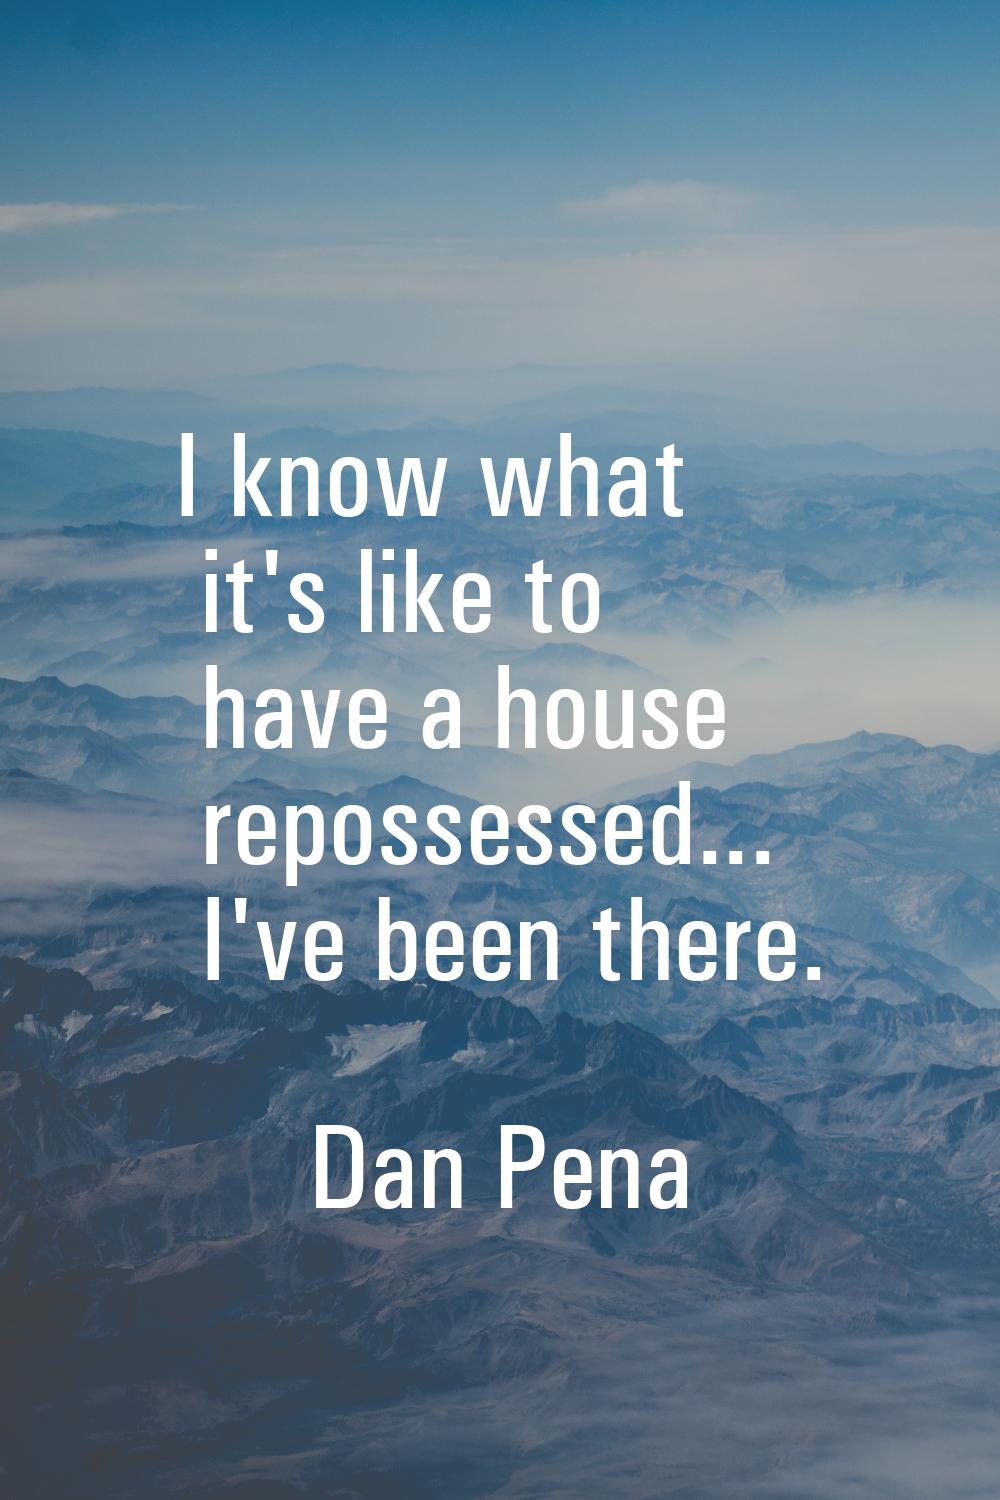 I know what it's like to have a house repossessed... I've been there.